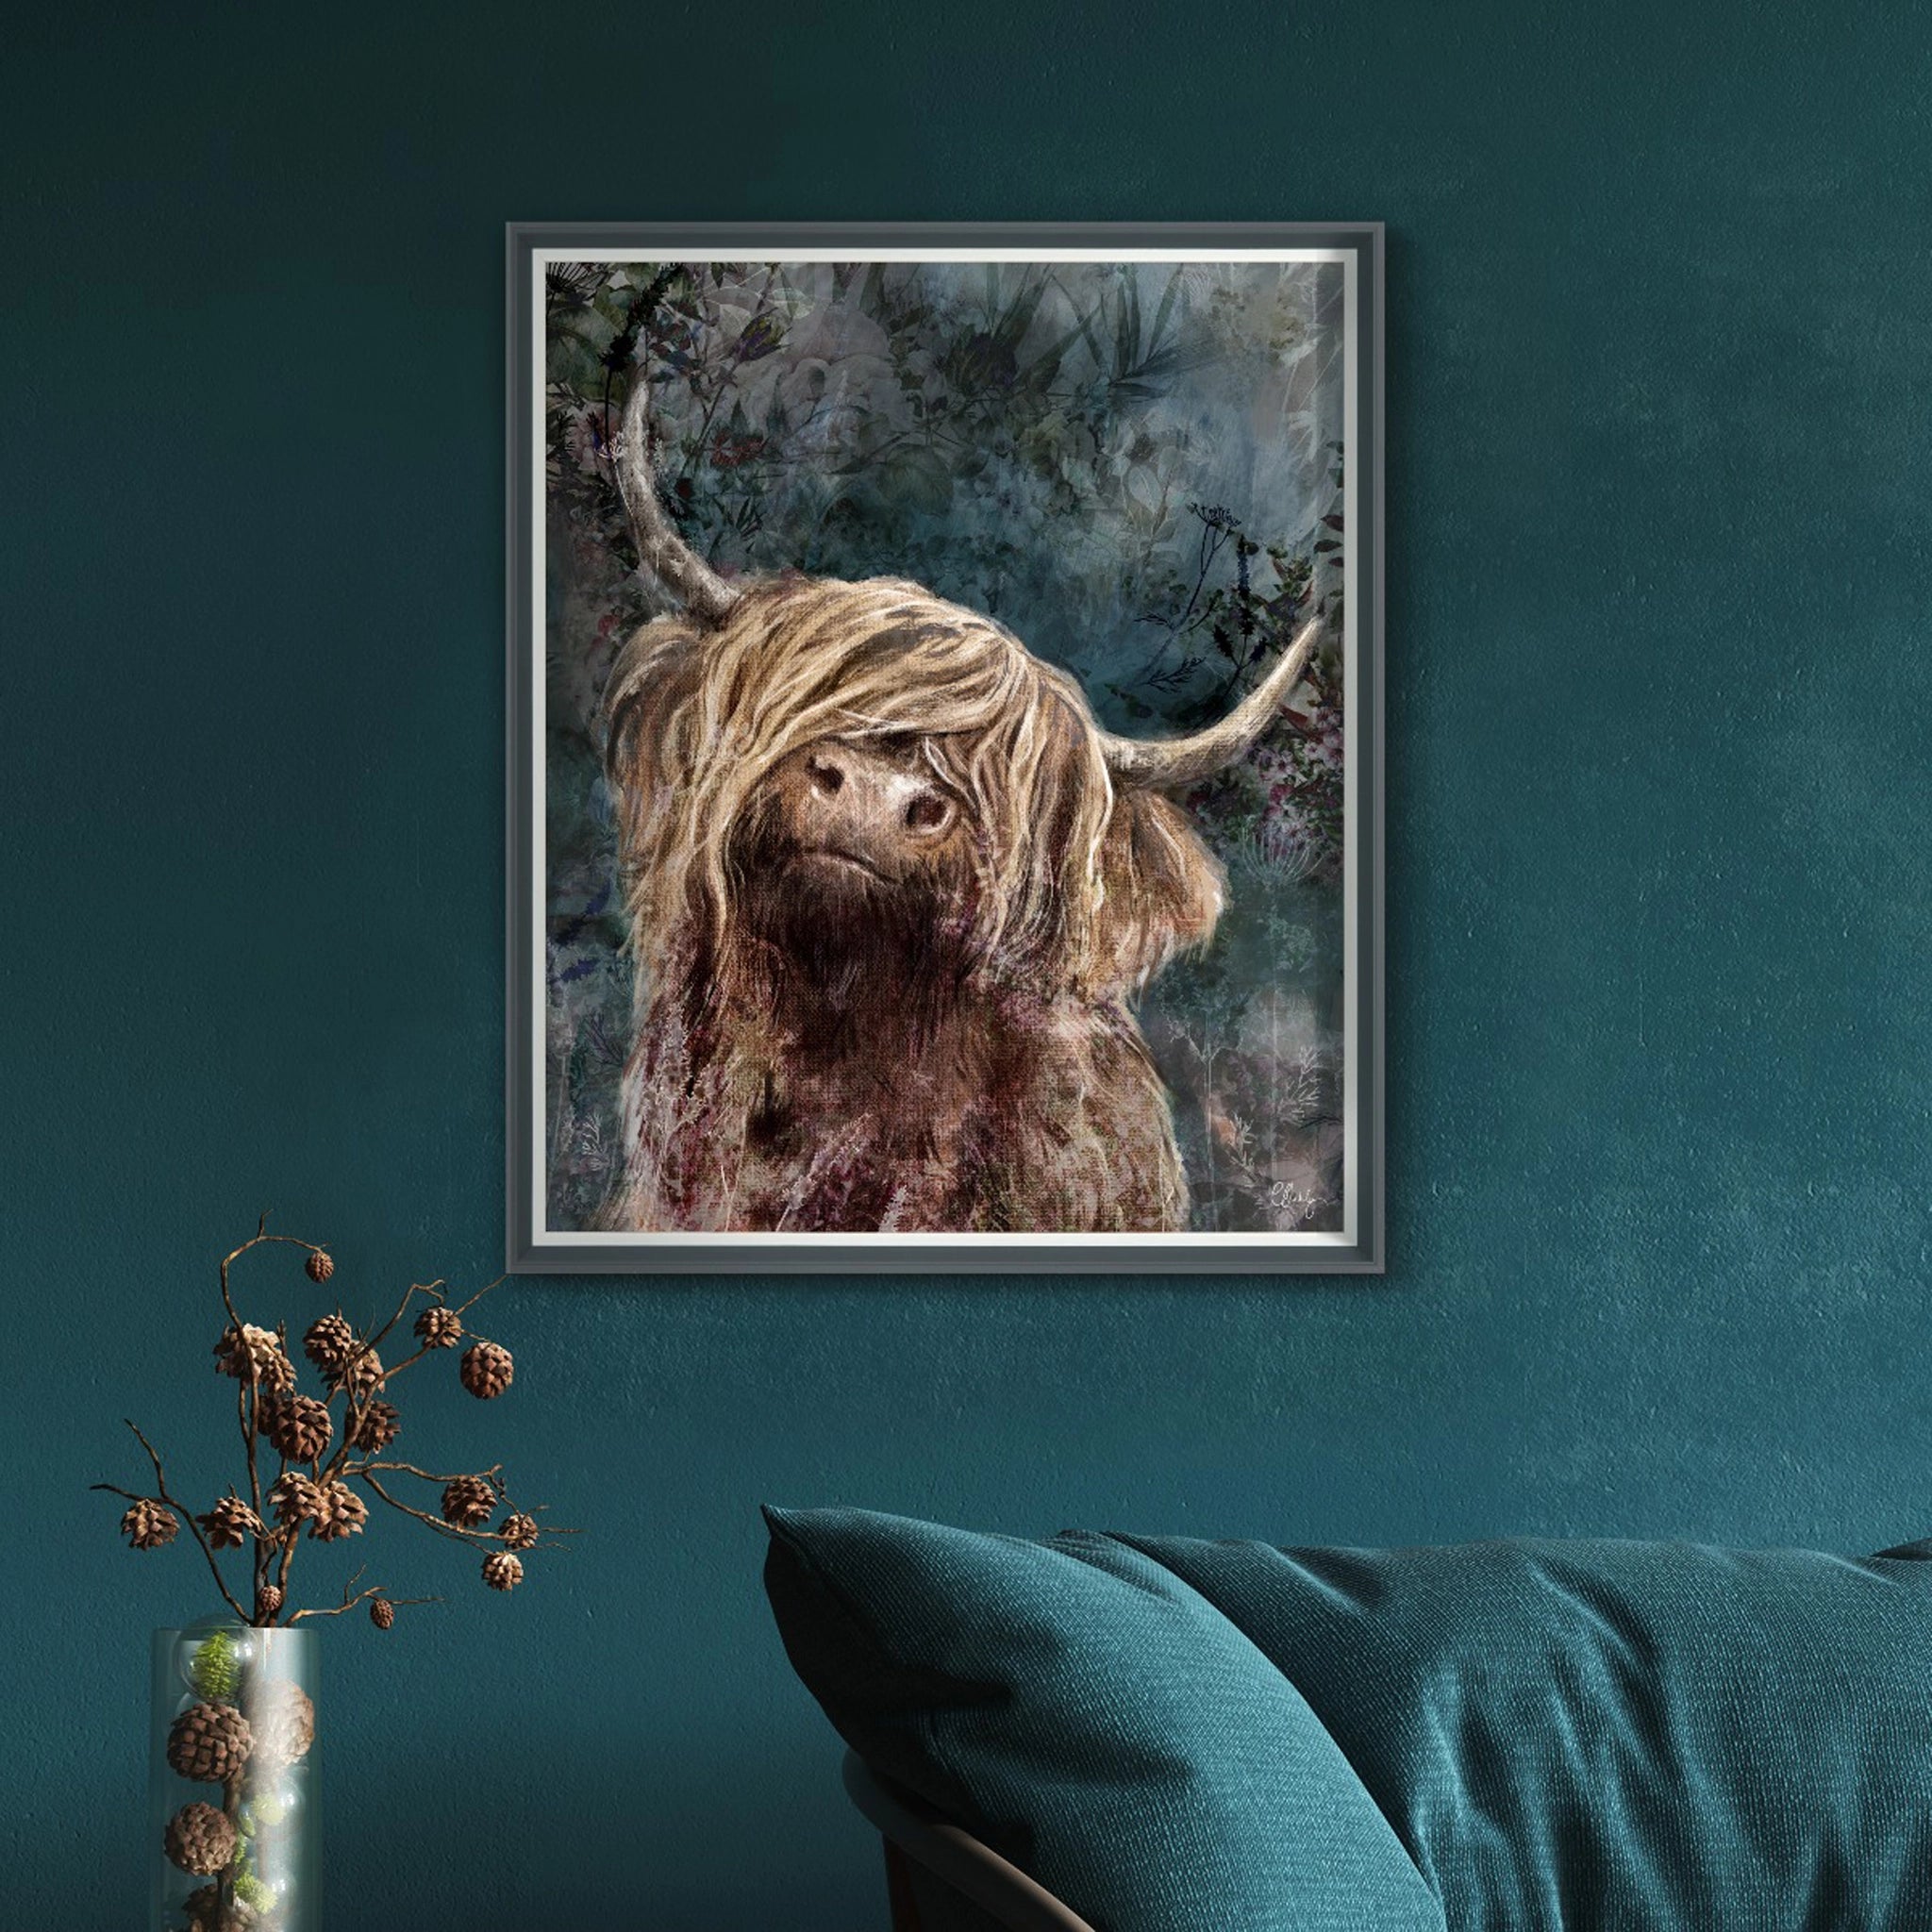 Framed canvas print of a red Highland cow with an impressionist blue background of foliage hanging in a dark room.